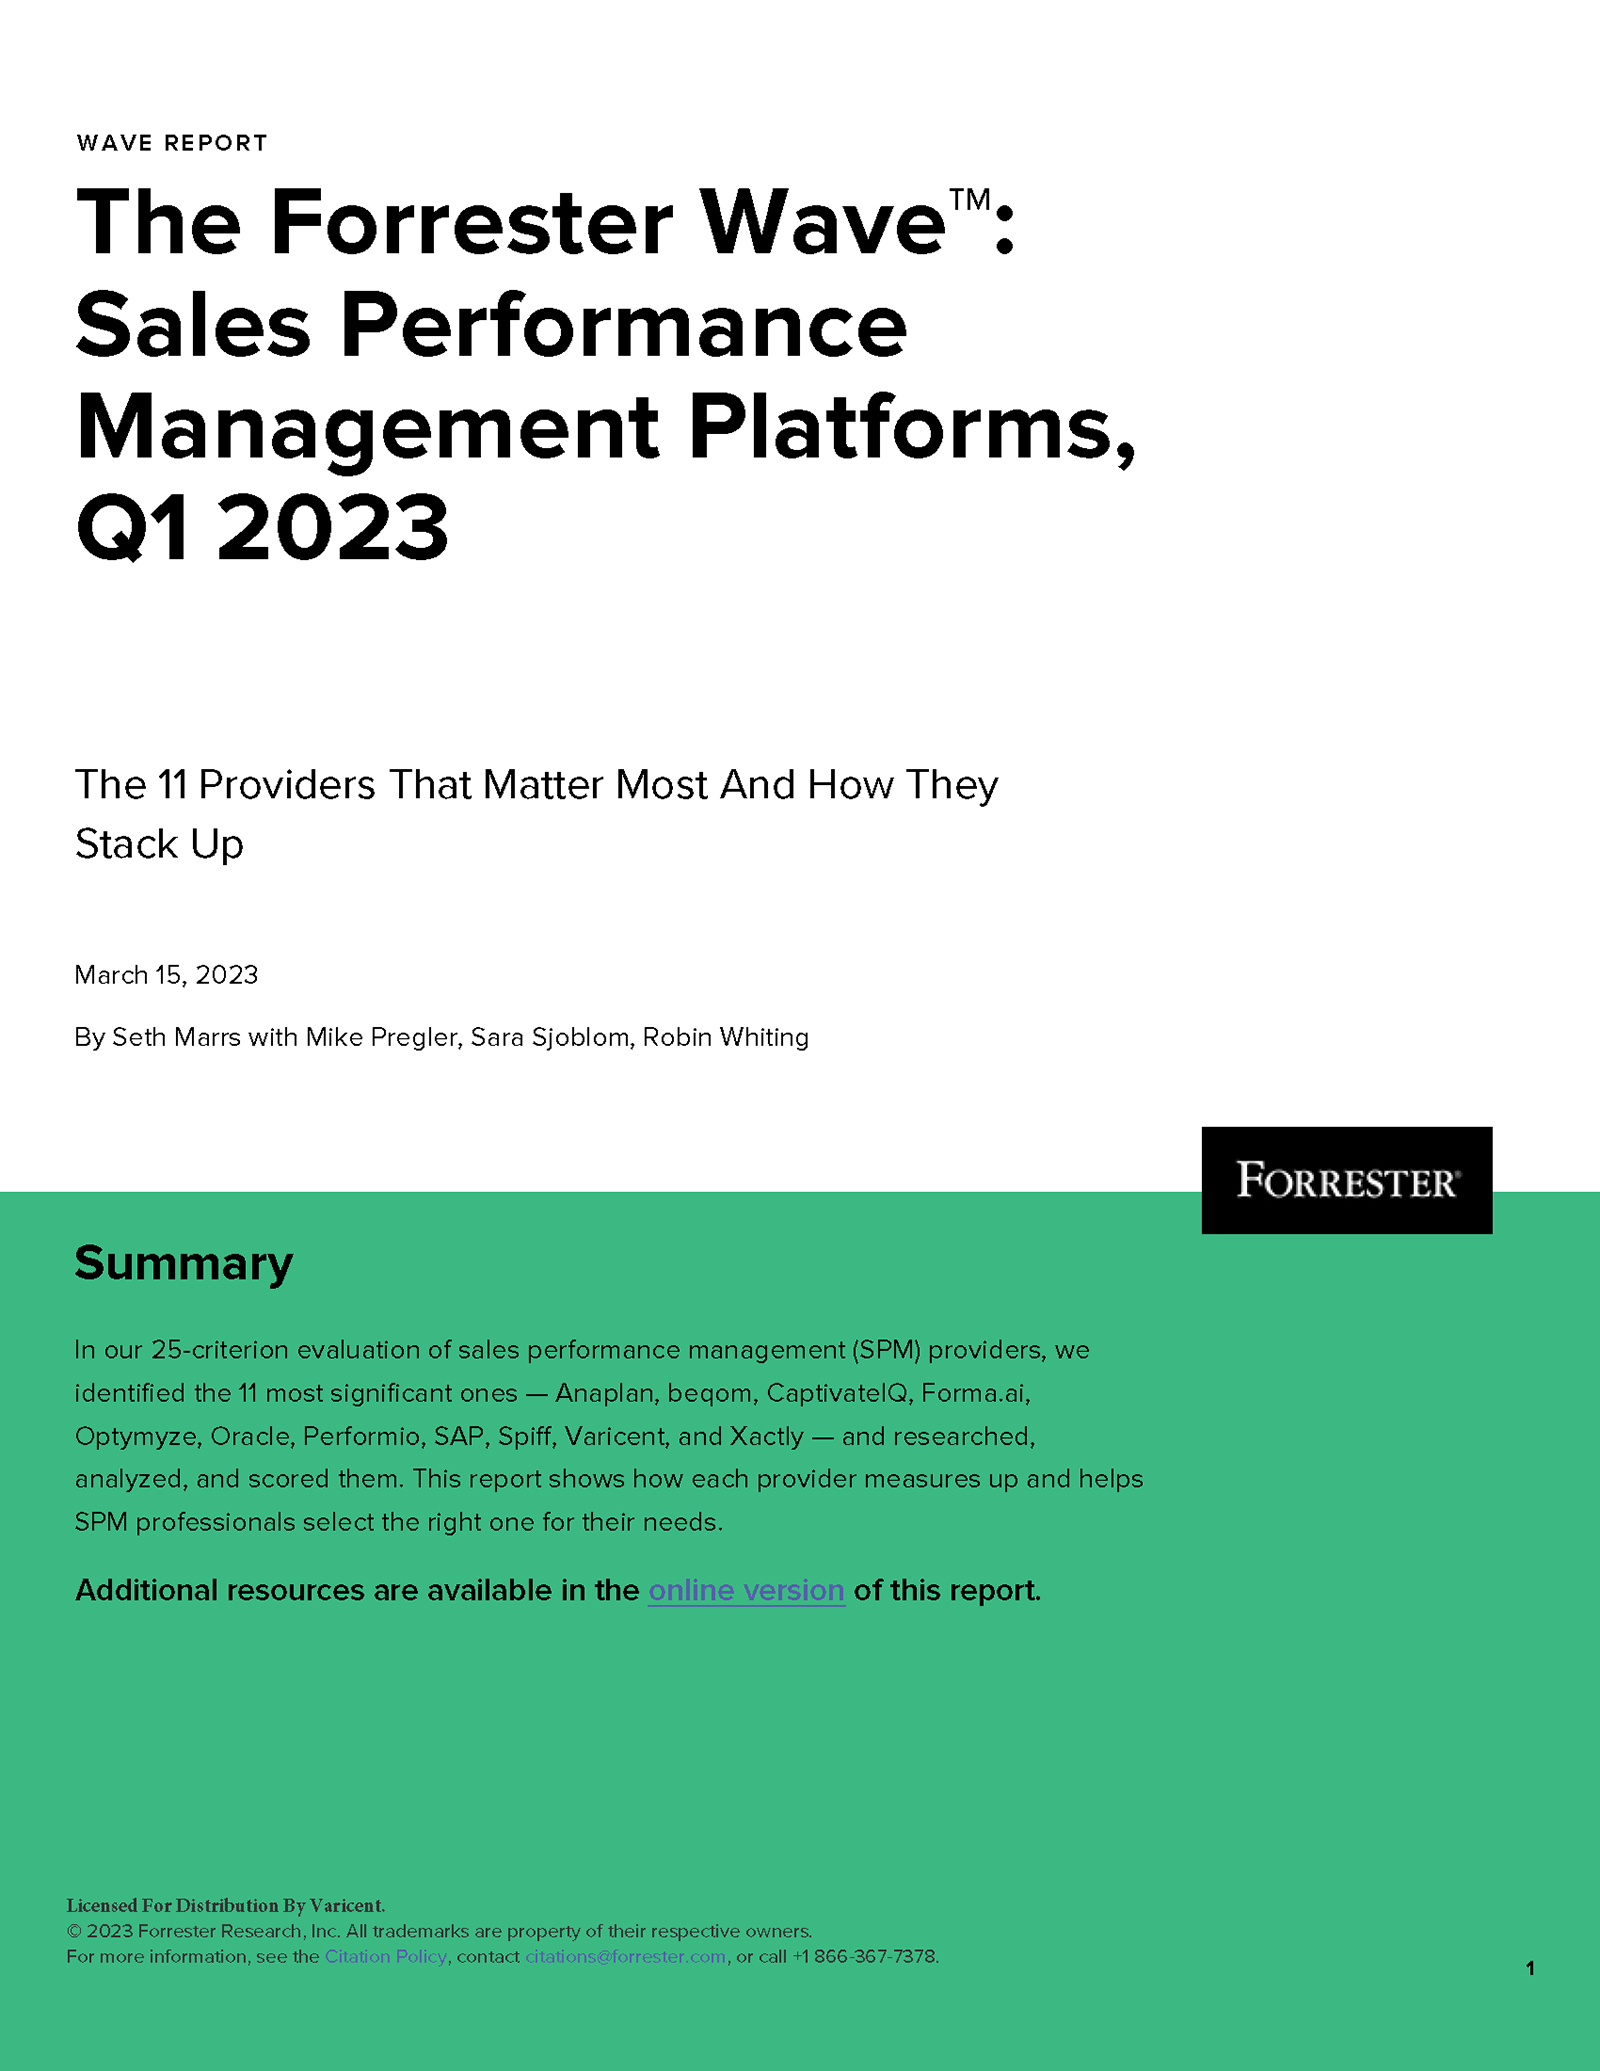 Cover of The Forrester Wave™: Sales Performance Management Platforms Report